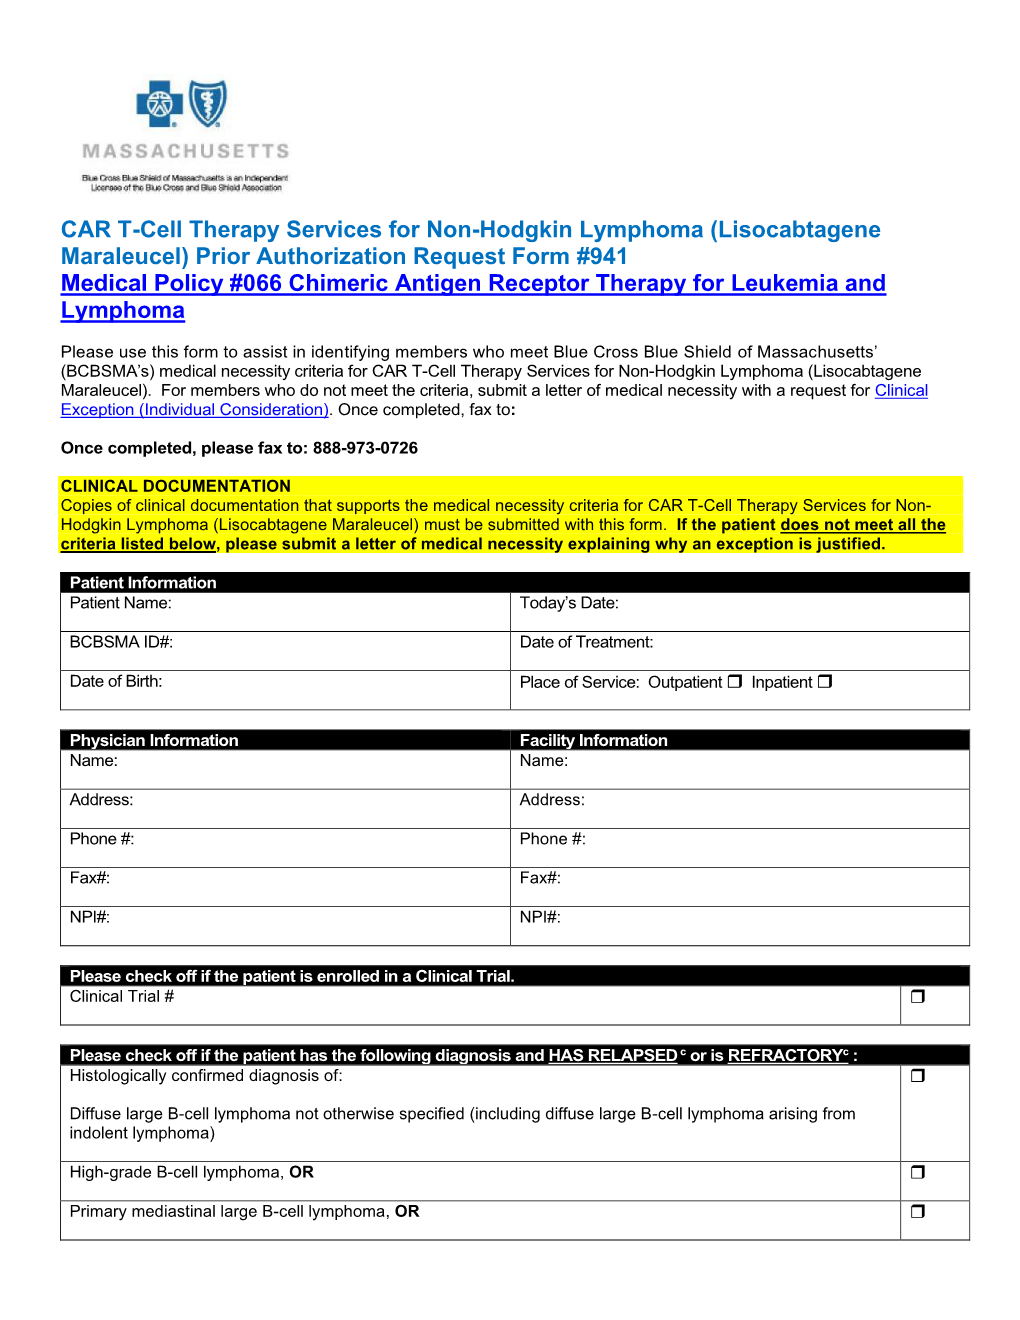 Non-Hodgkin Lymphoma (Lisocabtagene Maraleucel) Prior Authorization Request Form #941 Medical Policy #066 Chimeric Antigen Receptor Therapy for Leukemia and Lymphoma